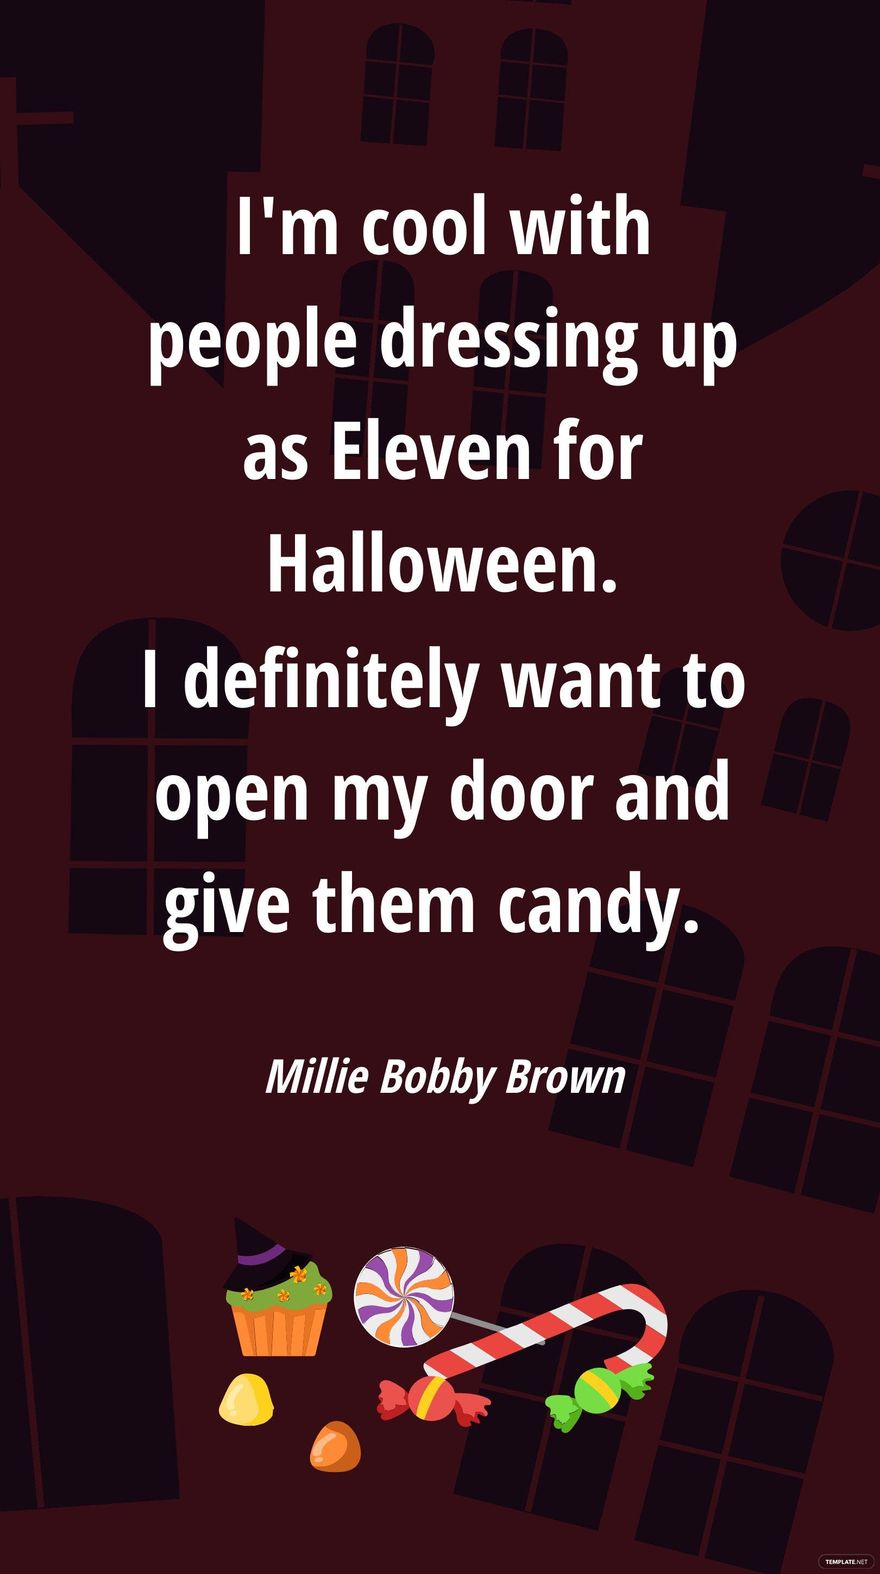 Millie Bobby Brown - I'm cool with people dressing up as Eleven for Halloween. I definitely want to open my door and give them candy.